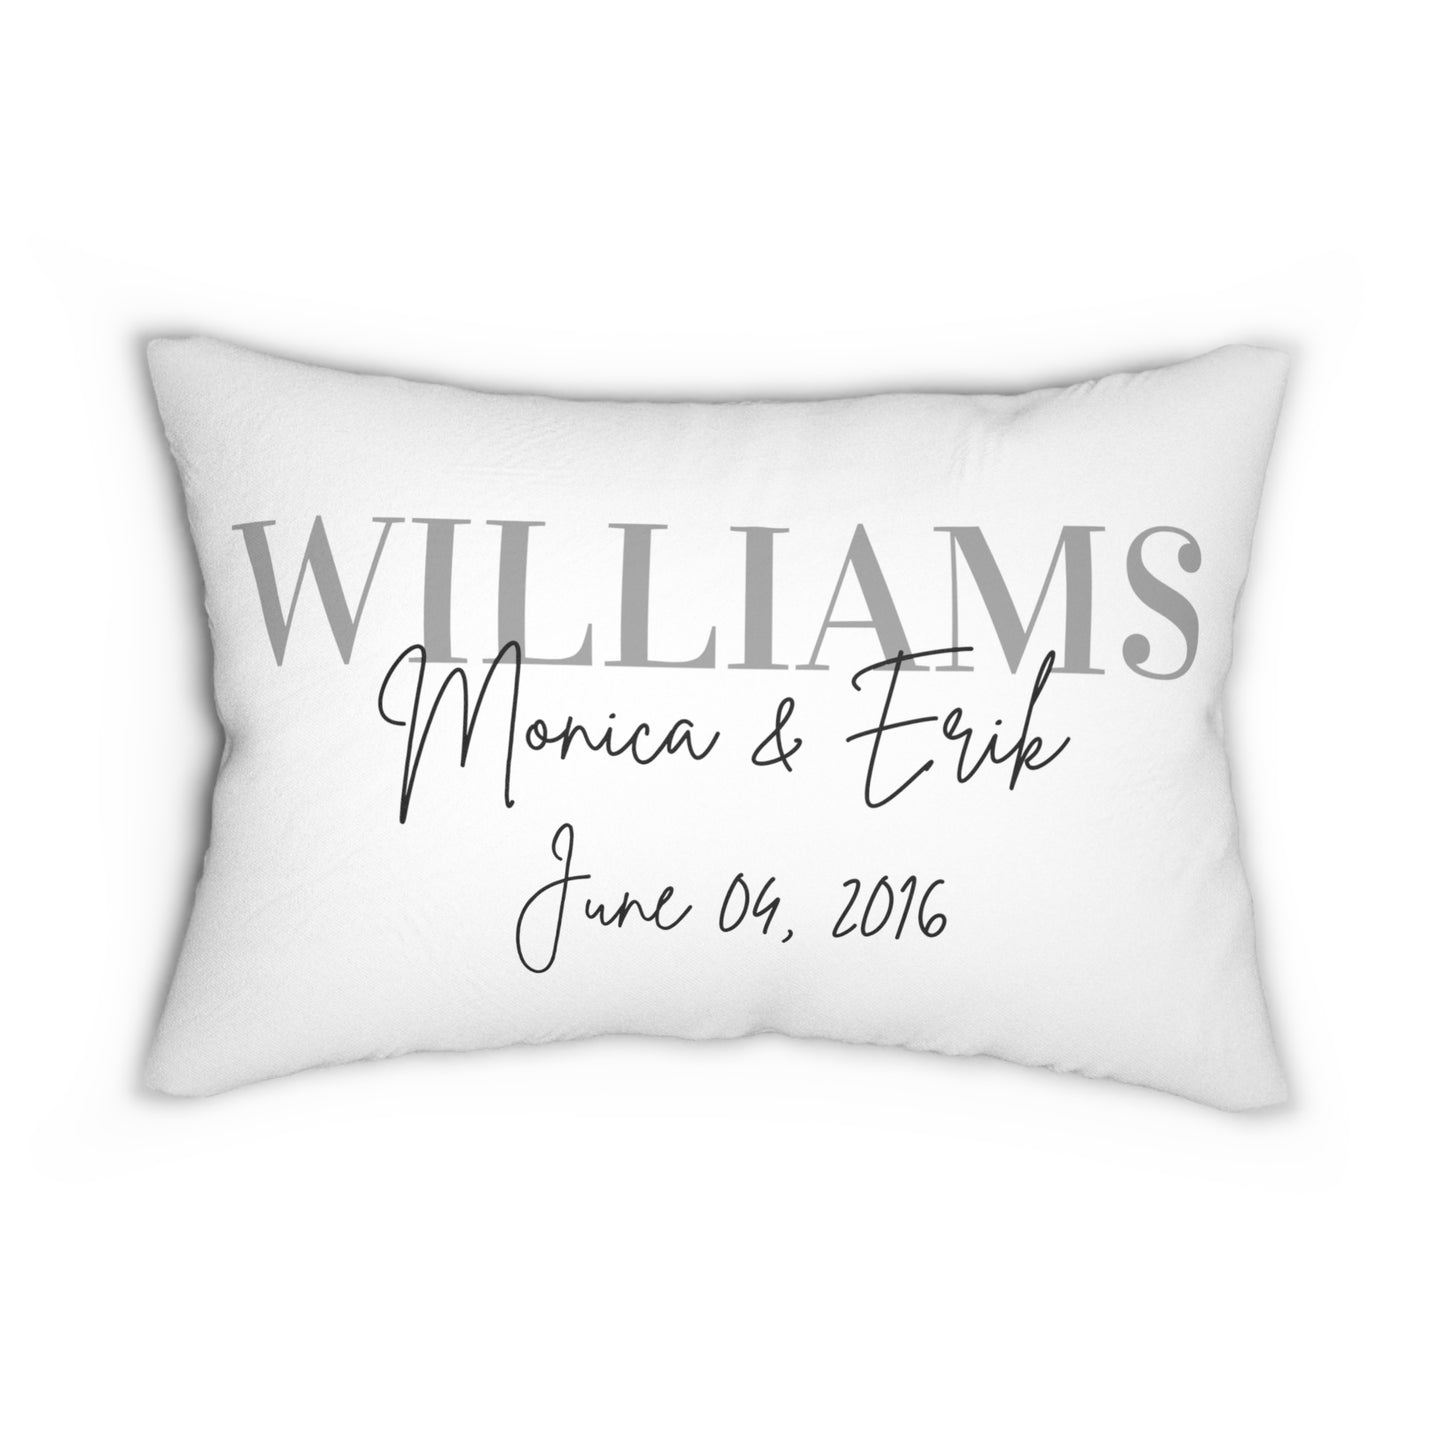 Personalized Pillows For Couples Home Decor Brides by Emilia Milan 